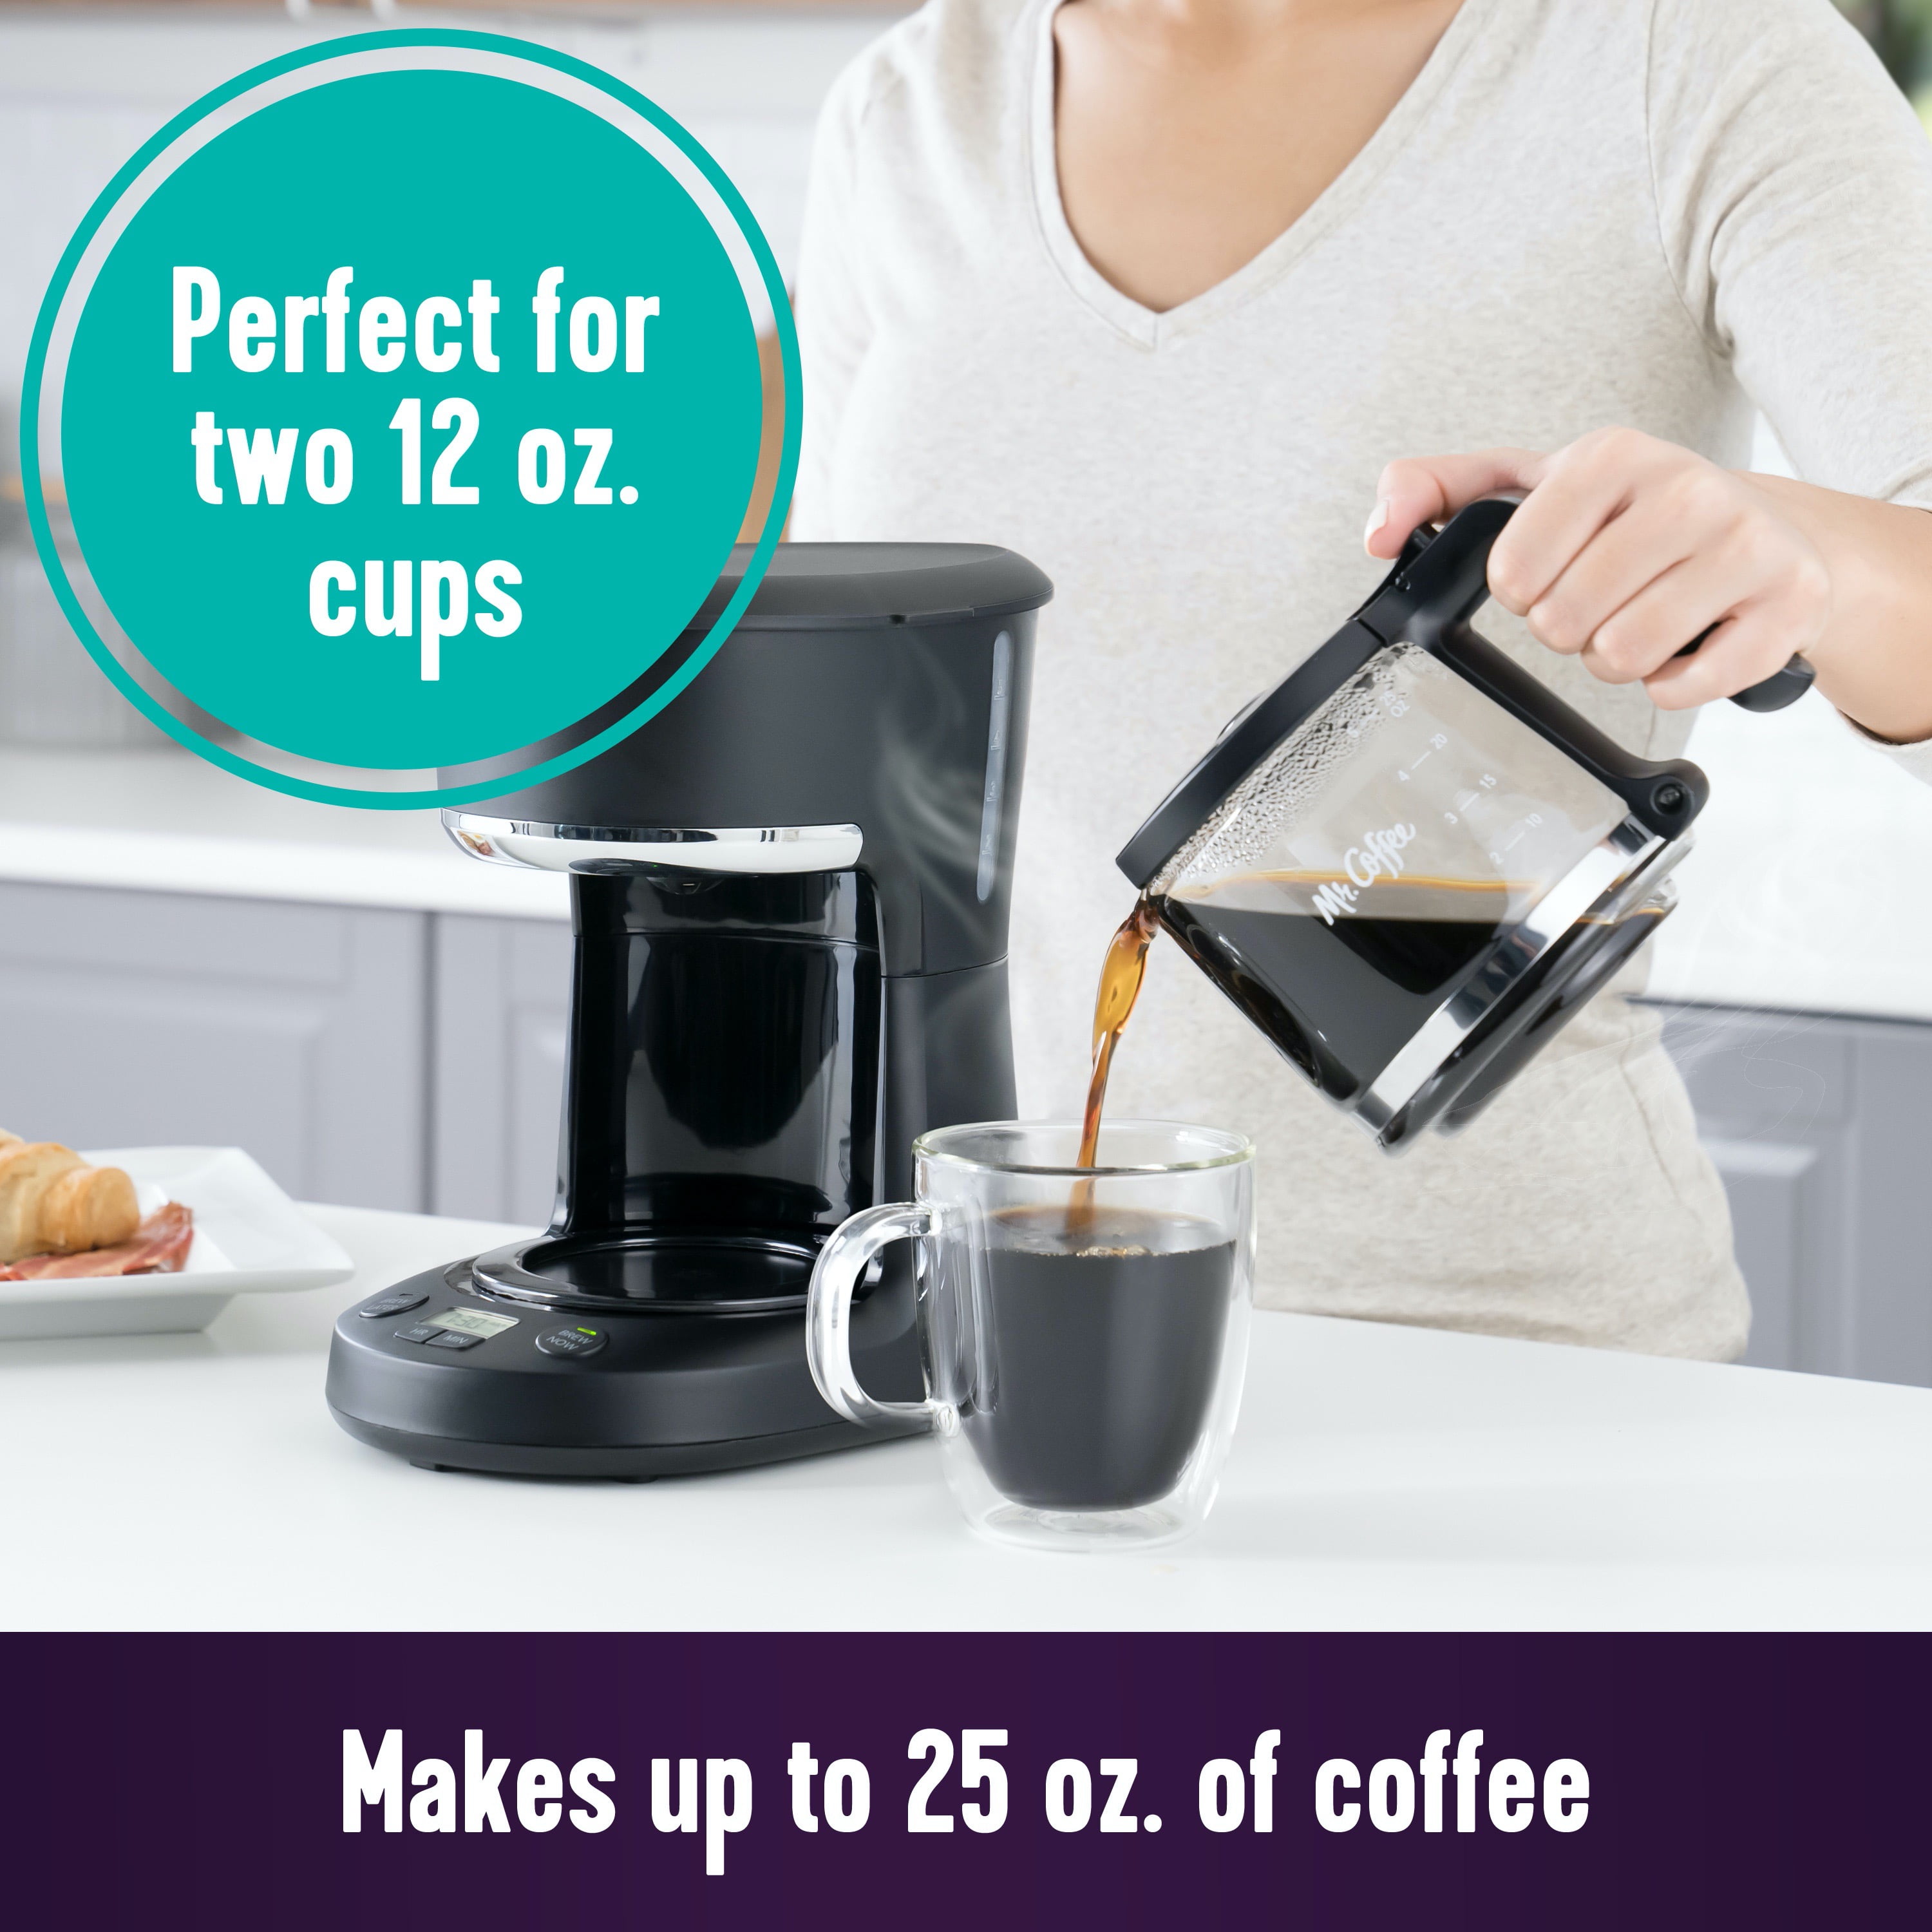 Mr. Coffee 5-Cup Digital Display Programmable Coffee Maker Mini Brew Now or  Later Auto Shut Off Arctic Blue